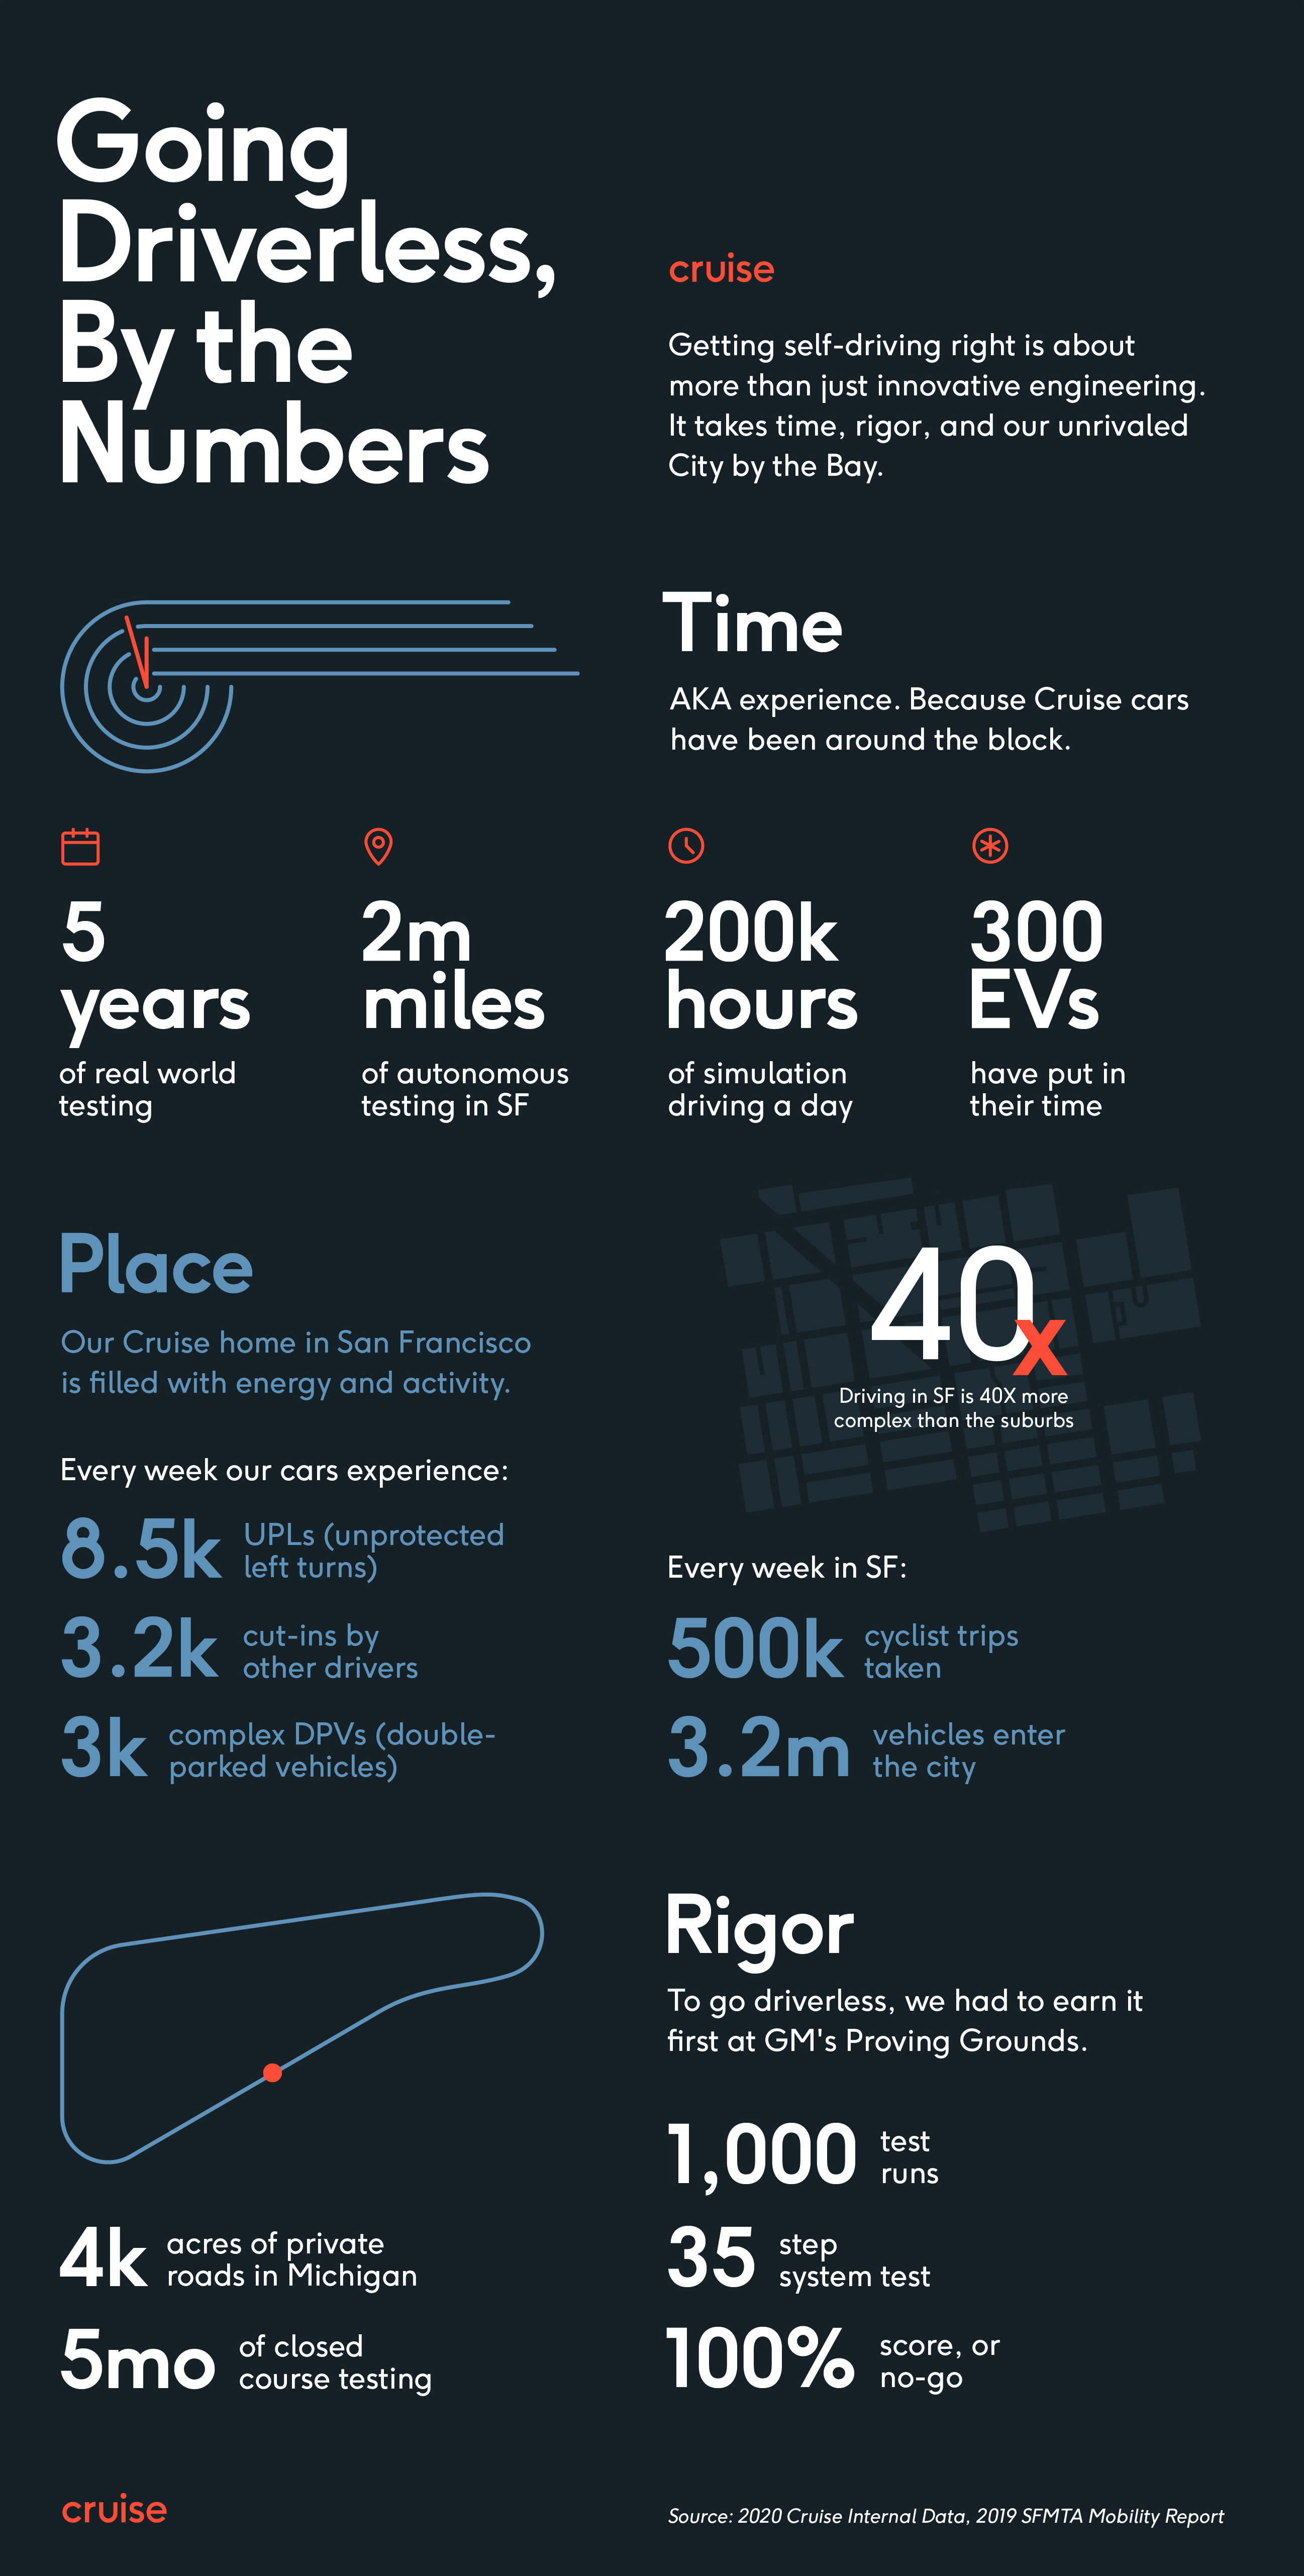 An infographic about how Cruise went driverless